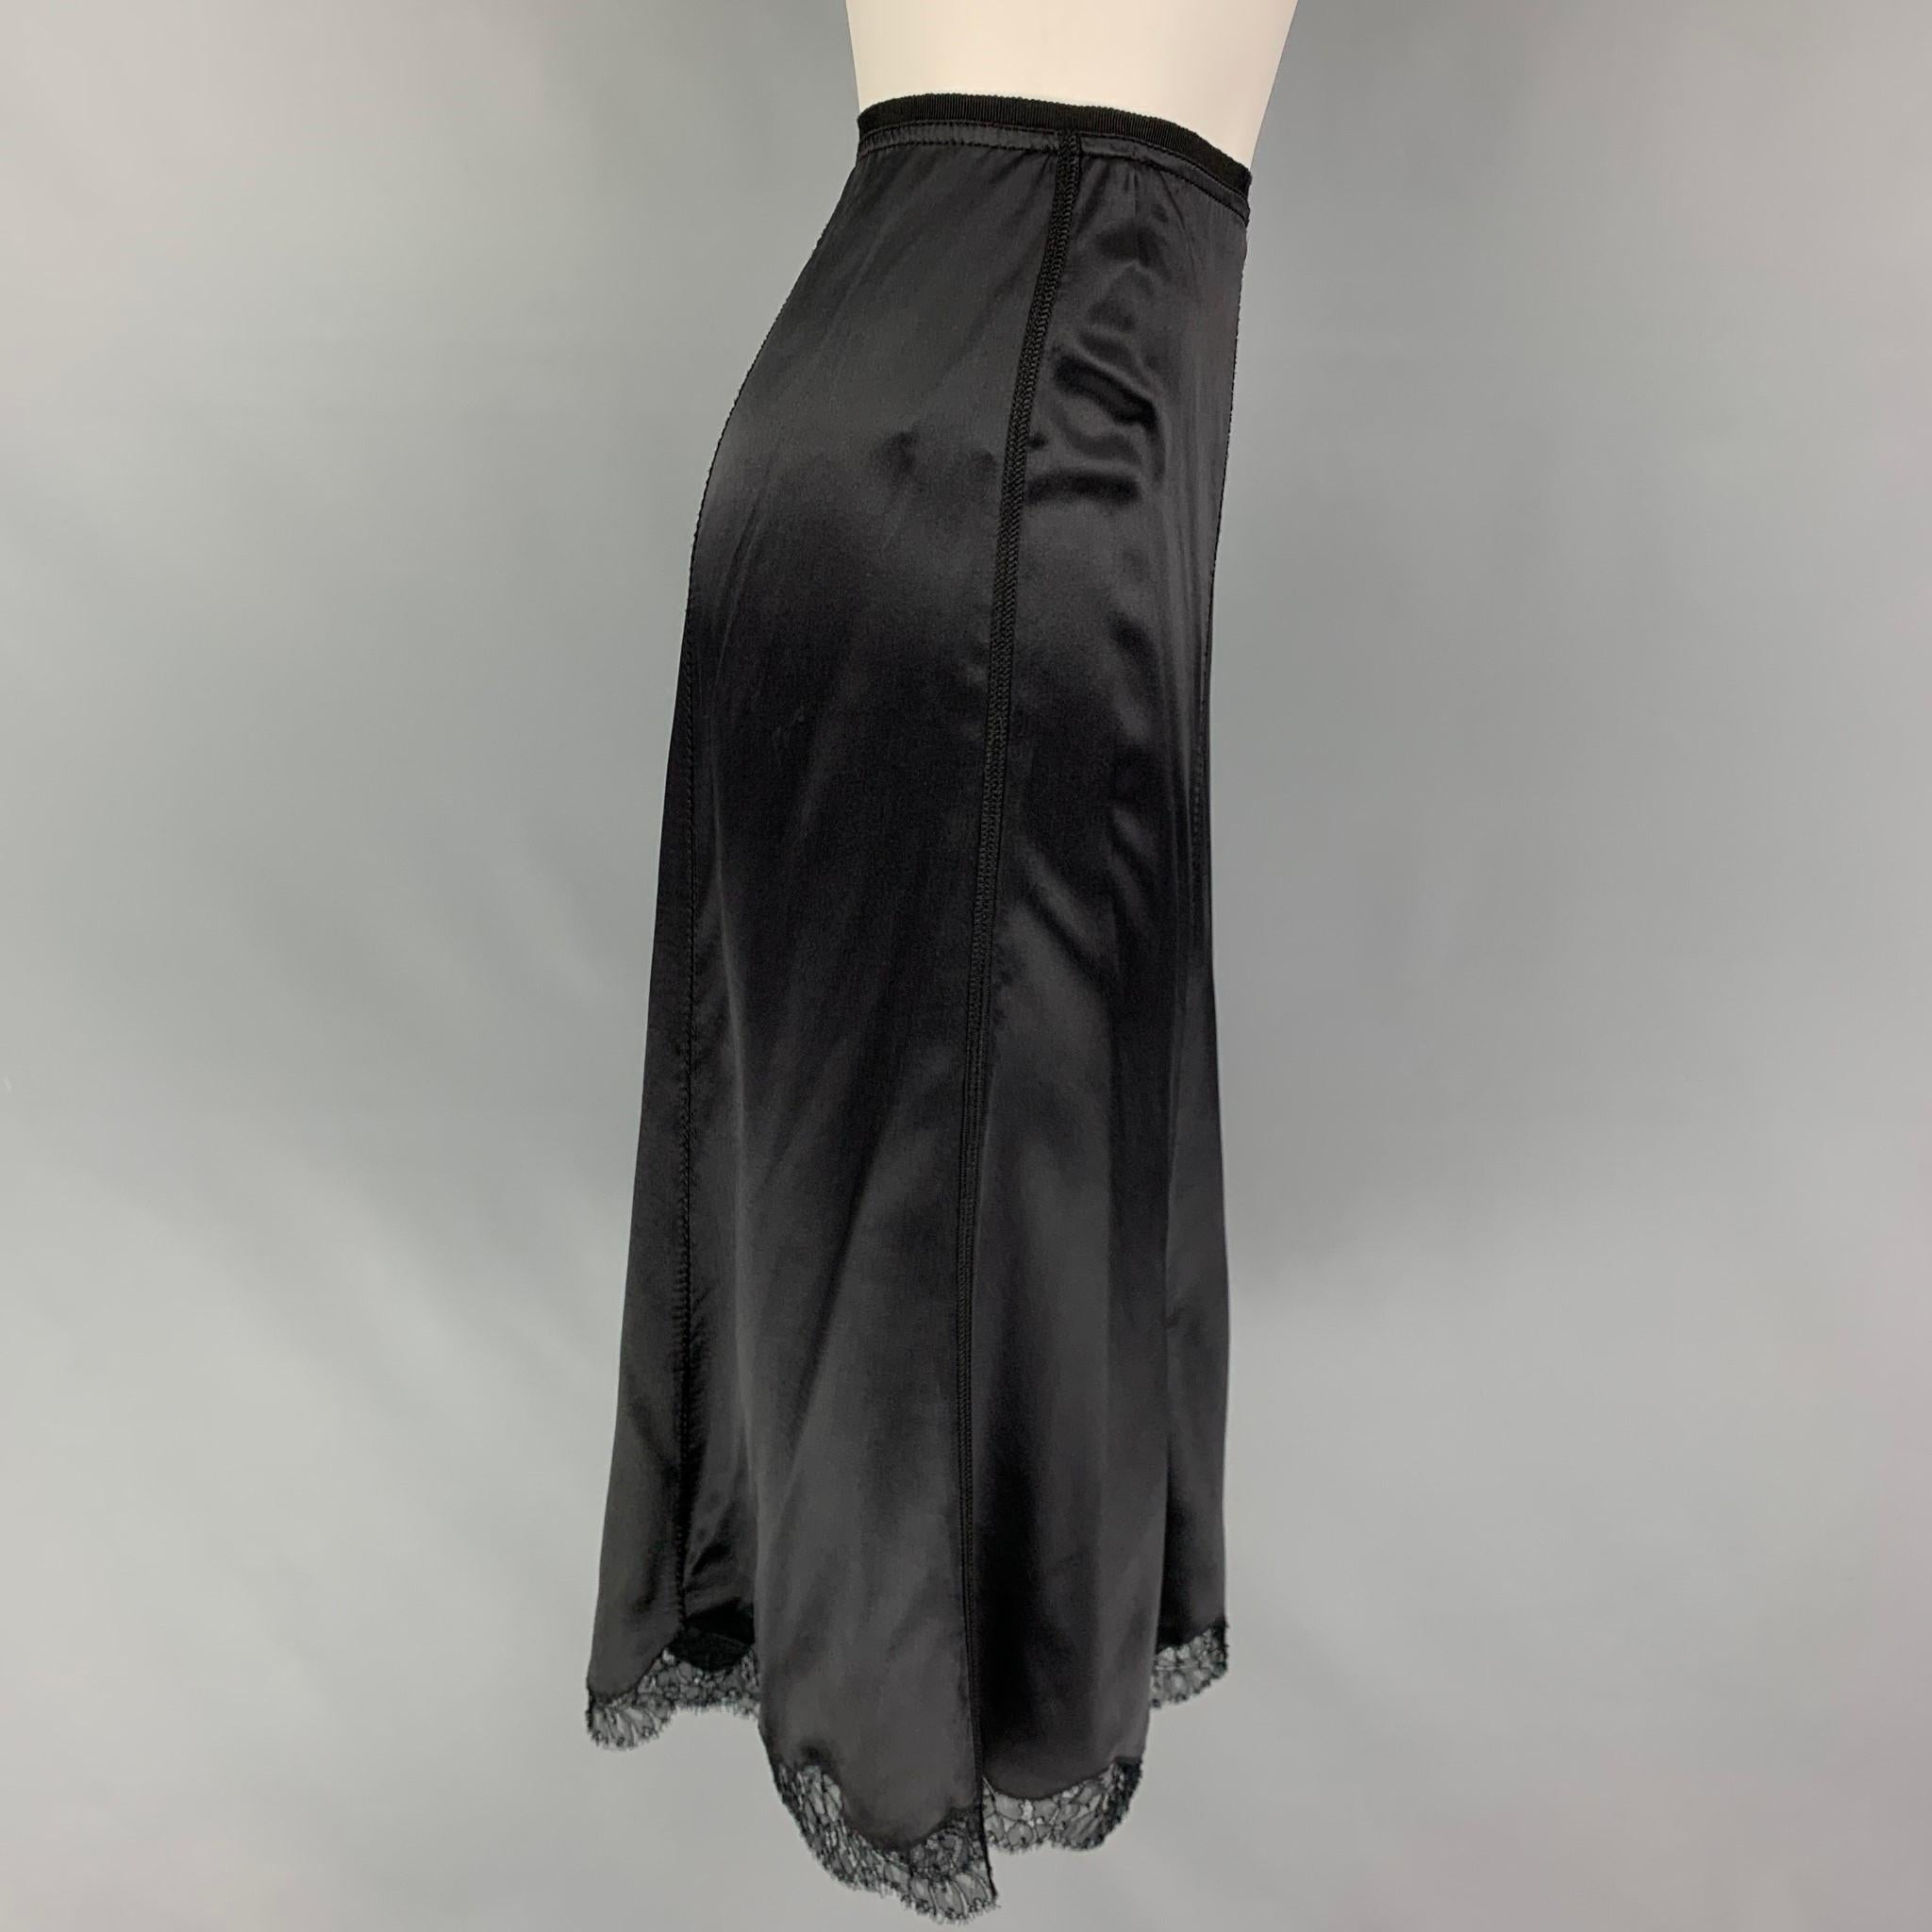 PRADA skirt comes in a black silk featuring a tulip style, lace trim, and a sie zipper closure. Made in Italy. 

Very Good Pre-Owned Condition.
Marked: 40

Measurements:

Waist: 28 in.
Hip: 40 in.
Length: 28.5 in. 